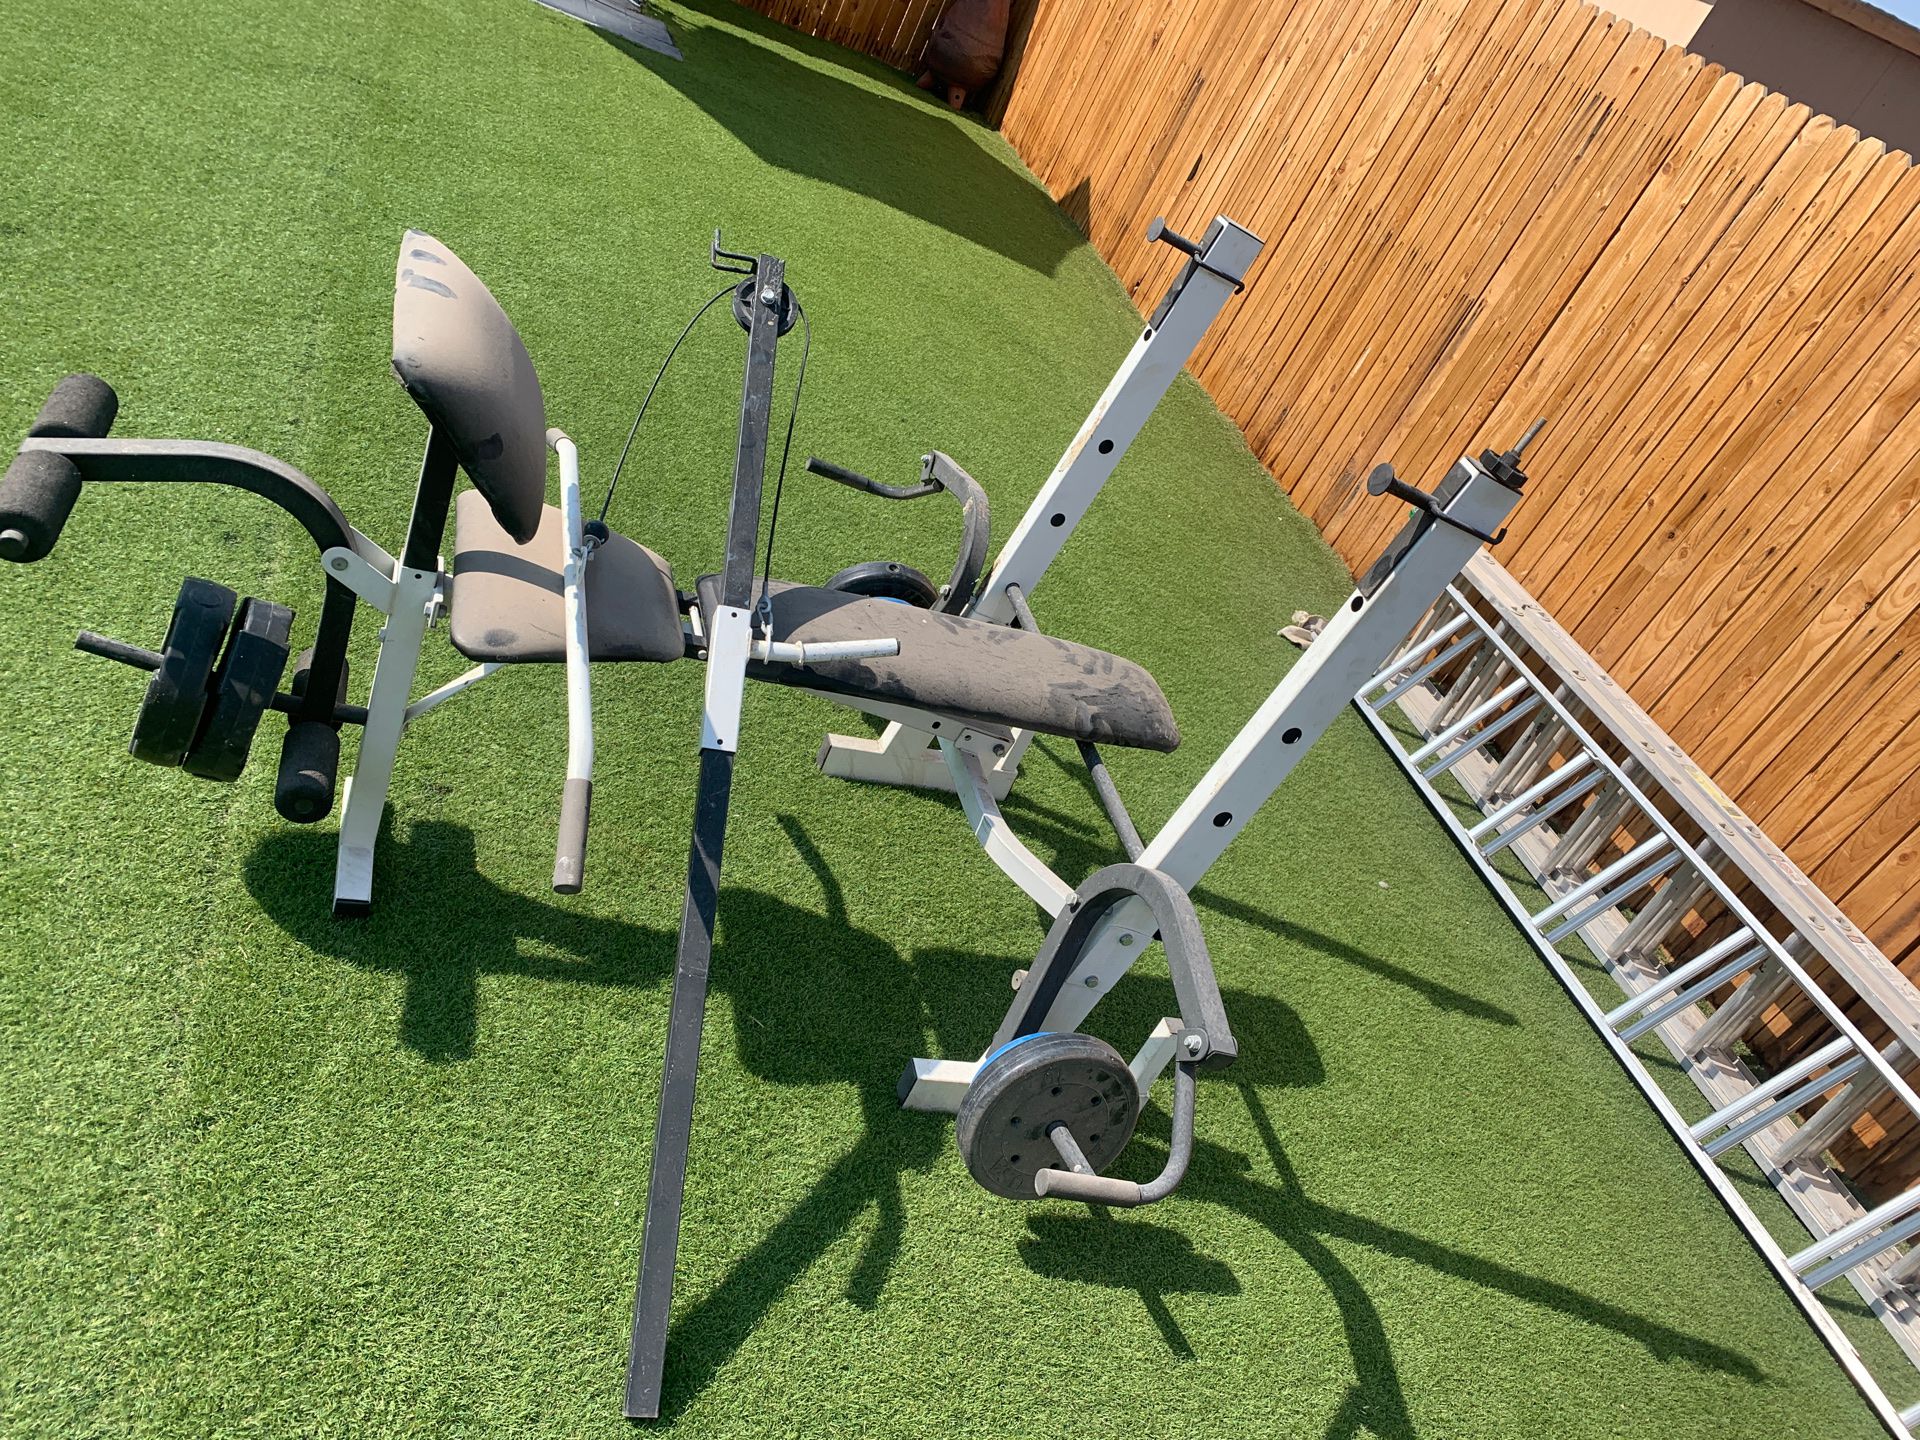 Free weights and bench